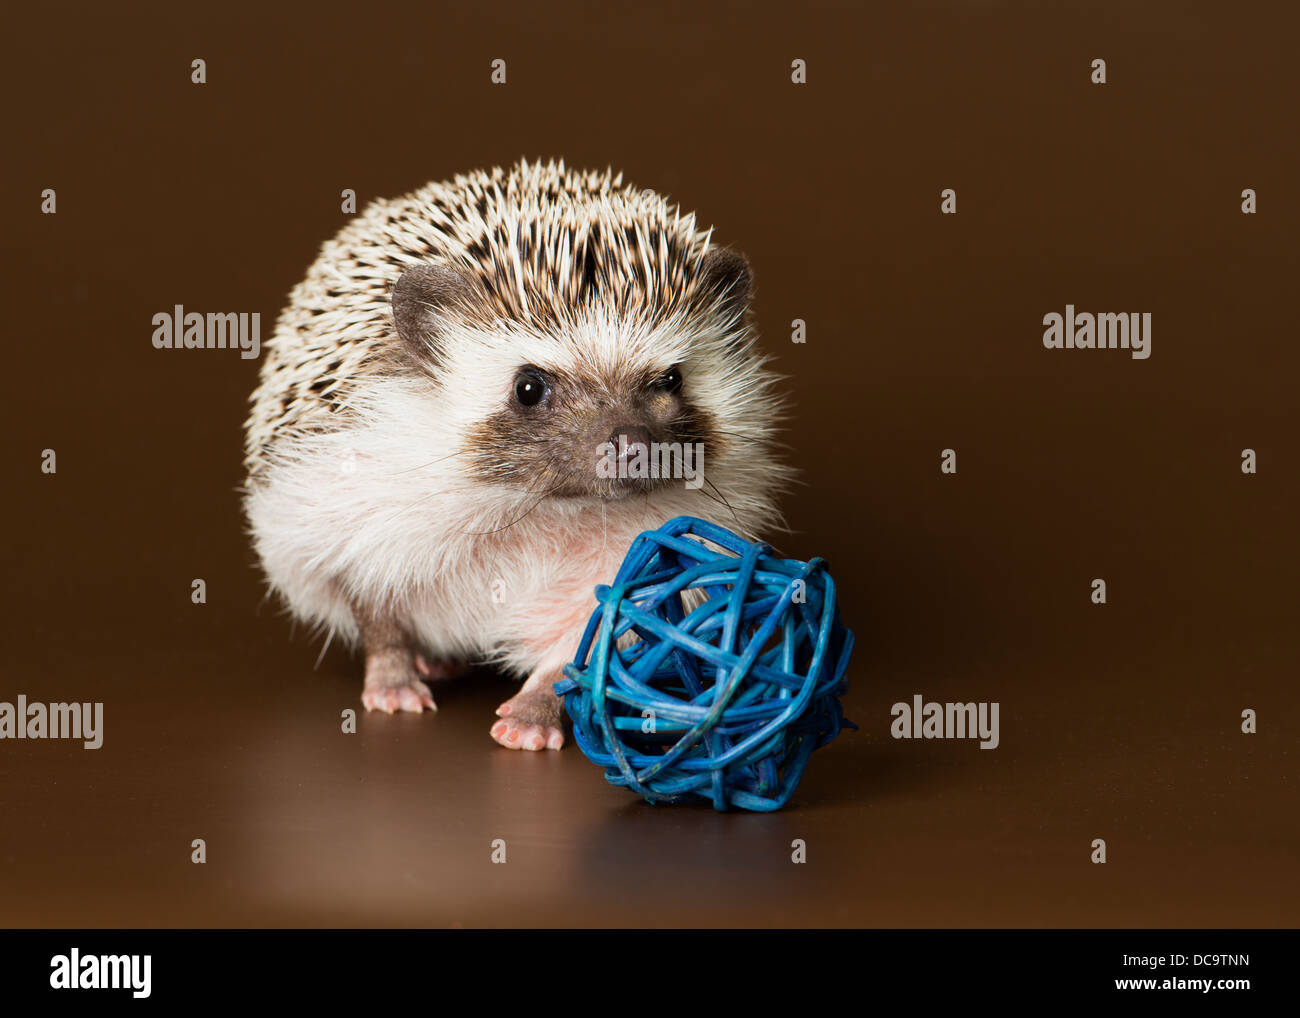 hedgehog, studio, wildlife, cute, small, wild, rodent, animal, white, isolated, mammal, shot, pet, young, bristle, protection, adorable, brown, prickl Stock Photo